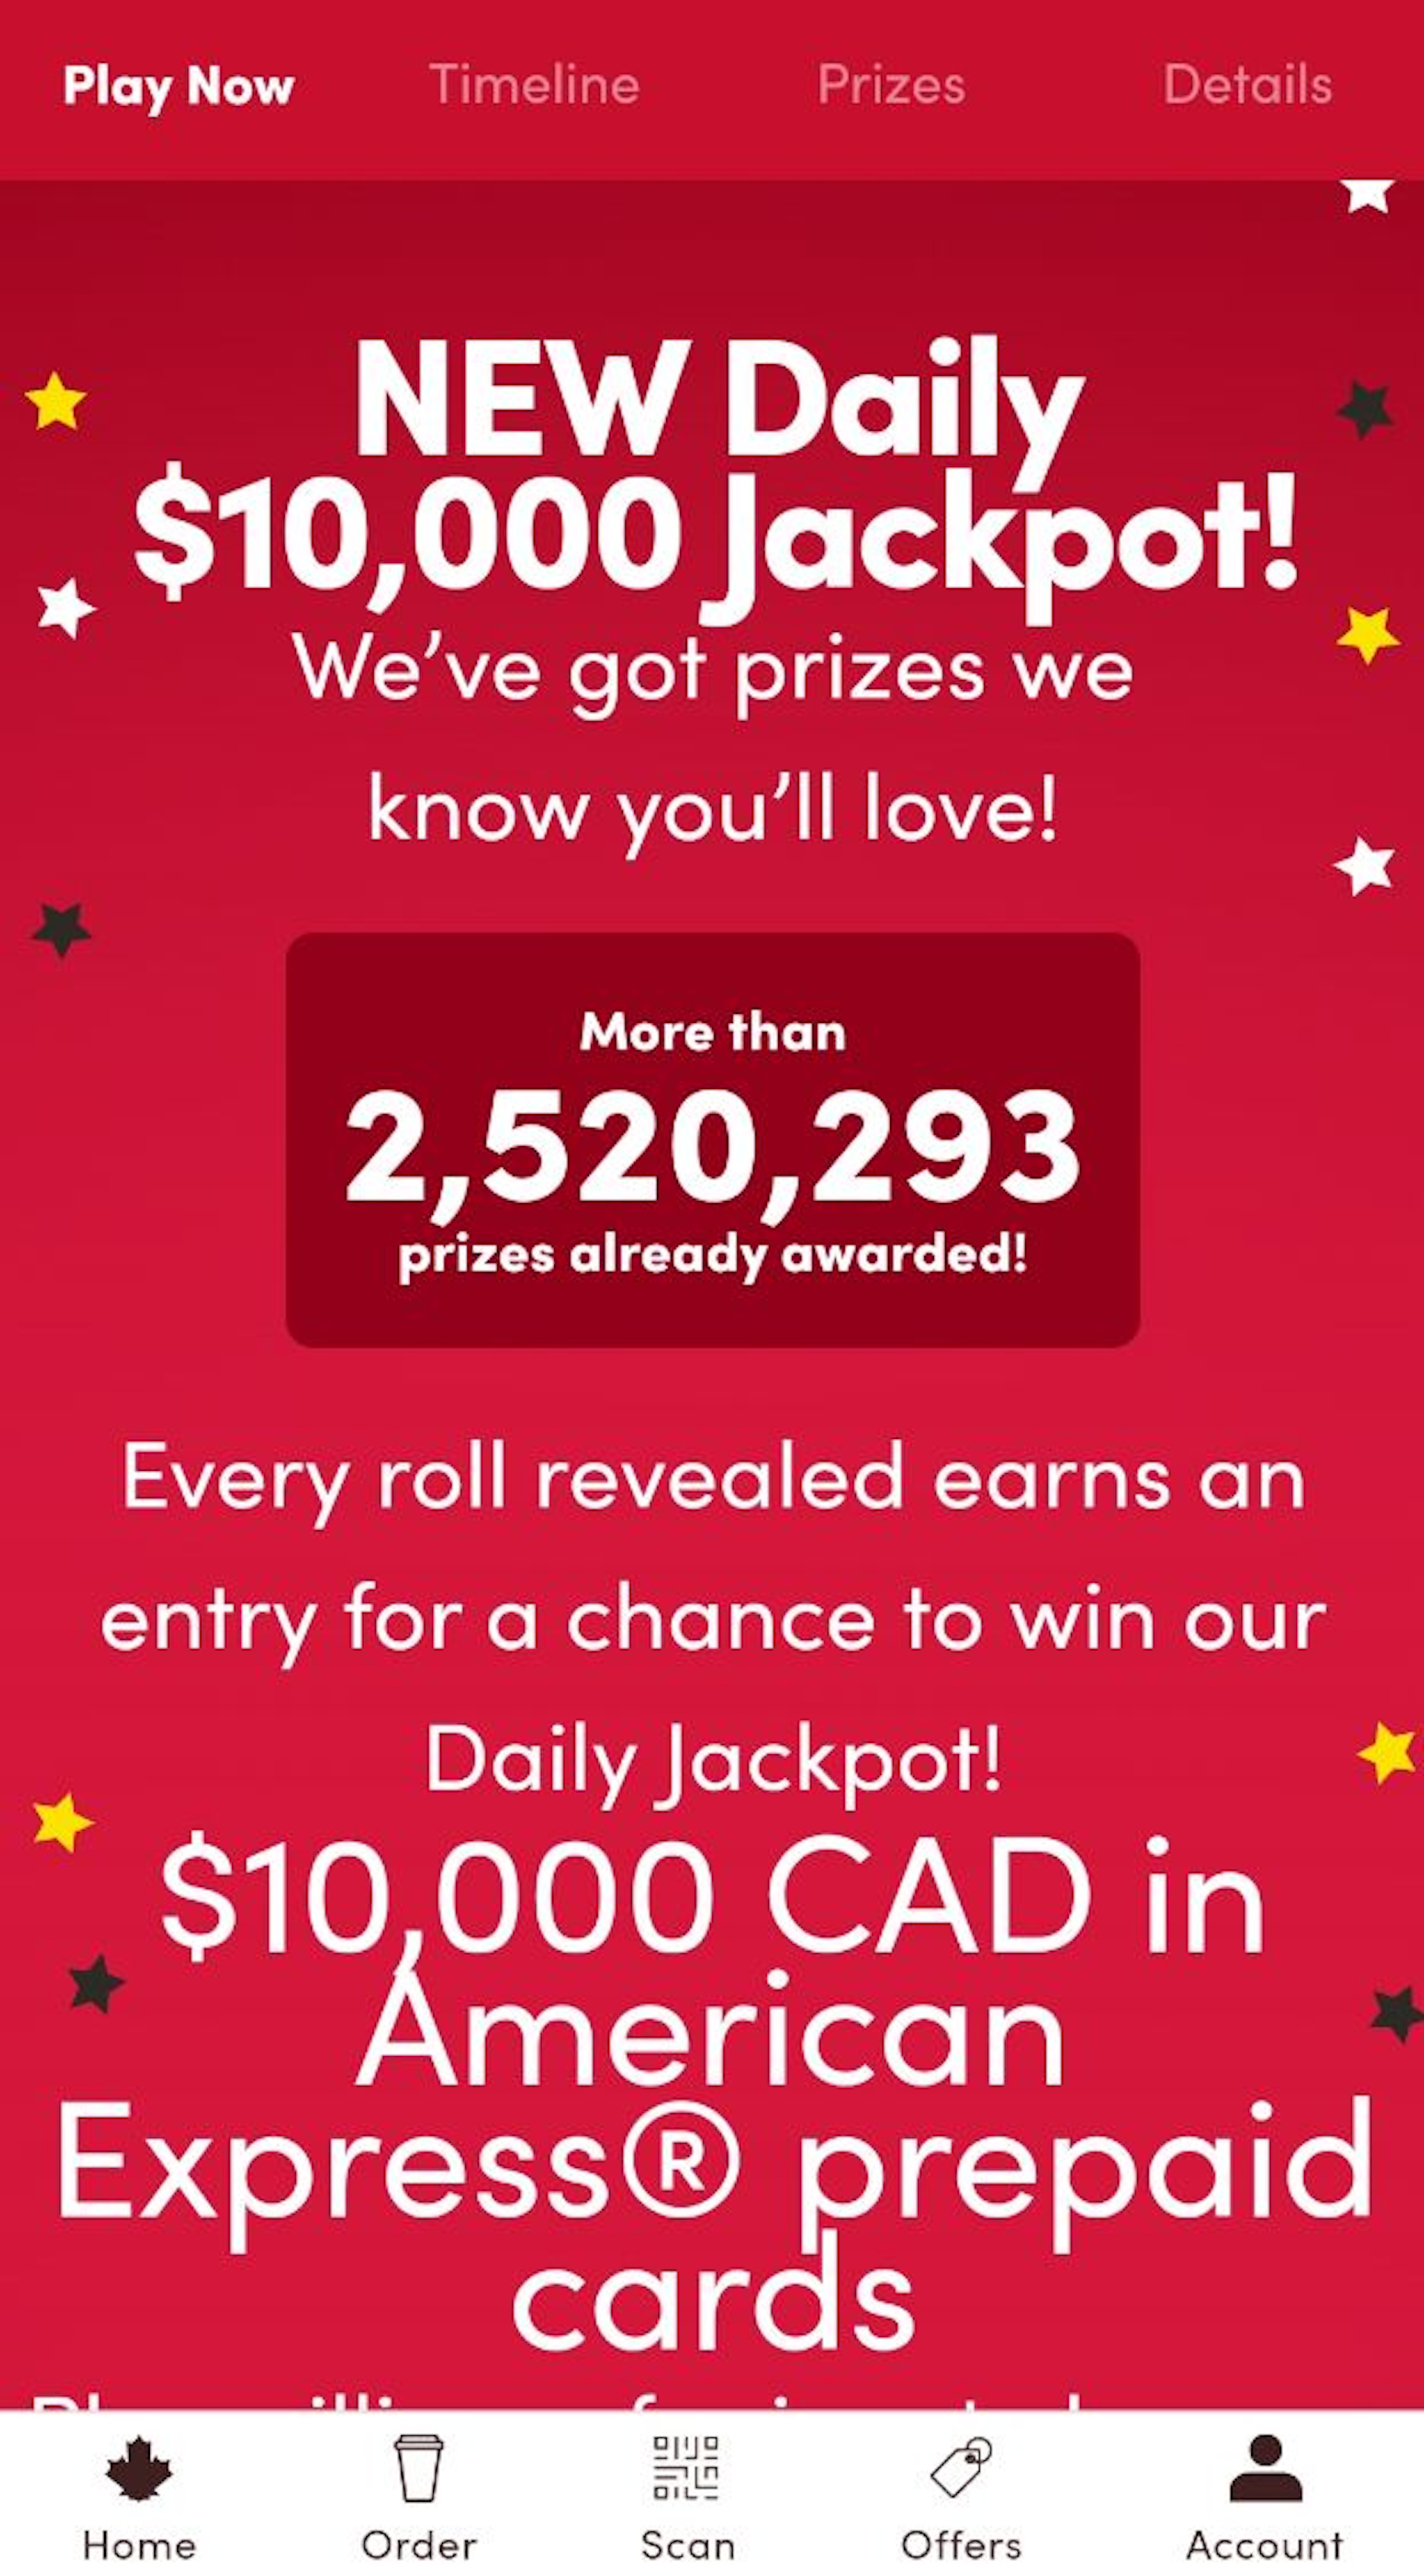 A screenshot of the Tim Hortons app showing More than 2,520,293 prizes already awarded!